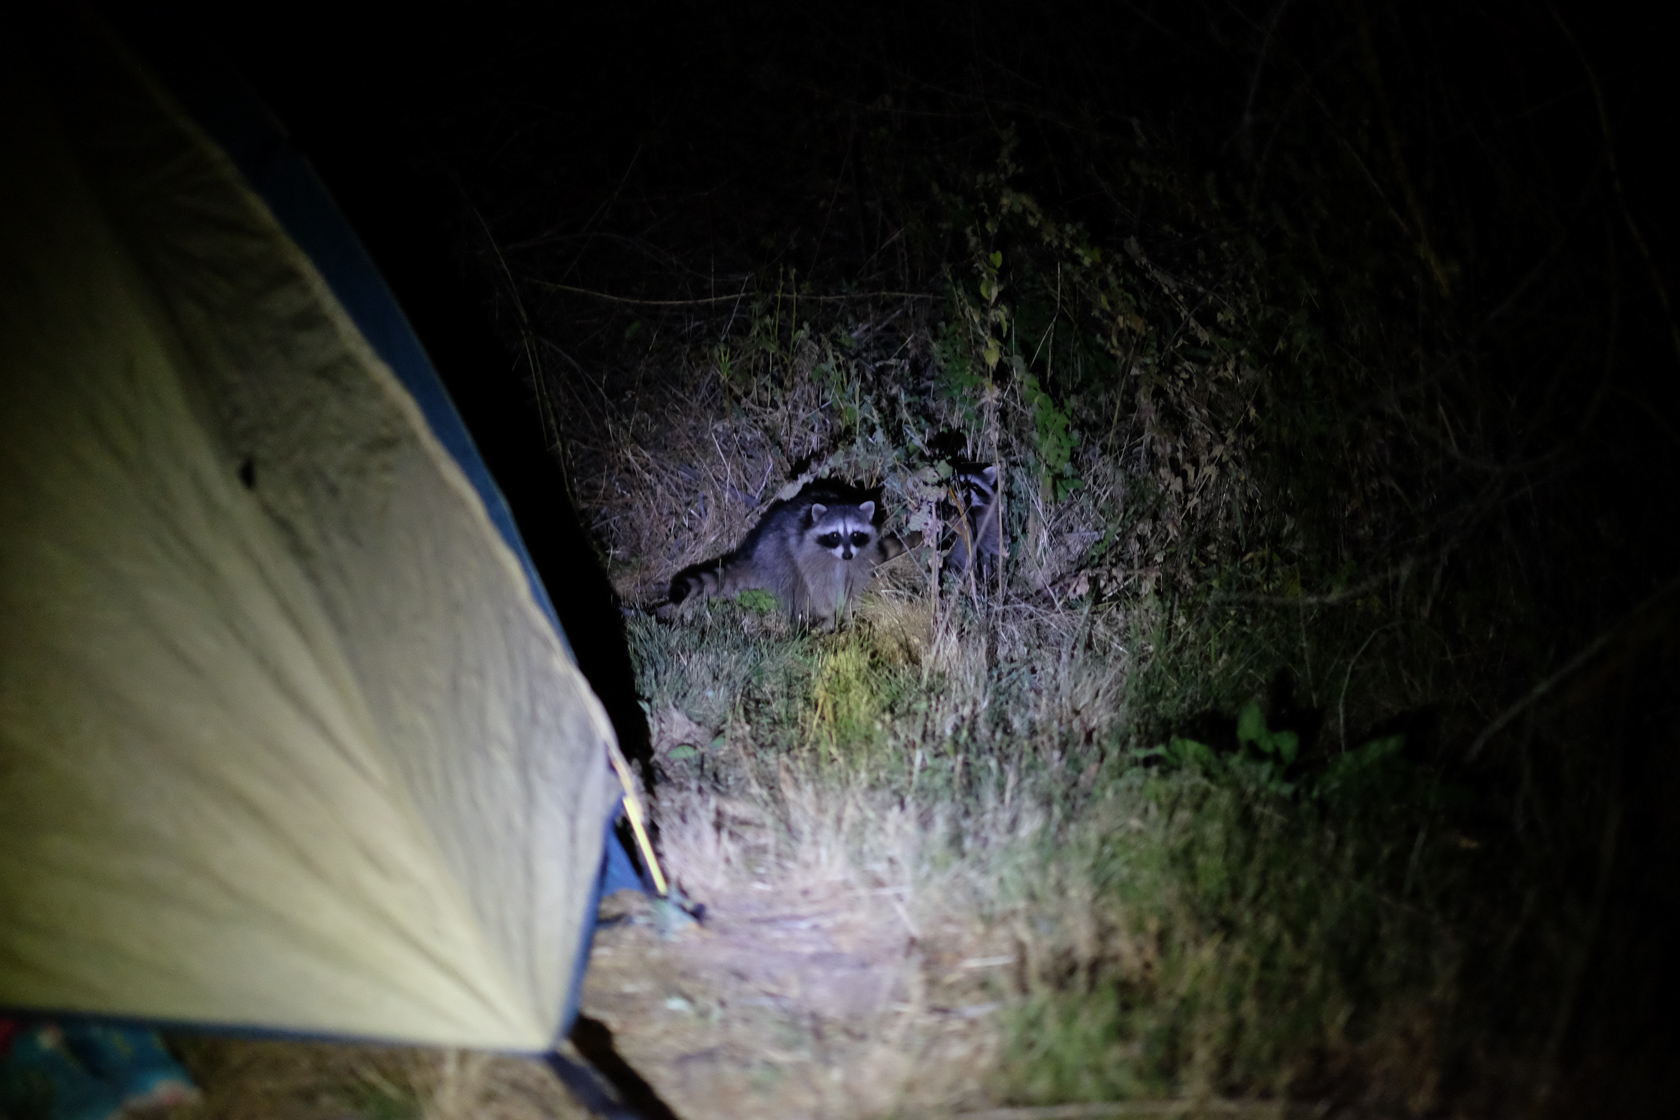 After we put Idara to bed in the tent, Rachael looked over in the bushes nearby and said, "It's a cat!" Instead of a cat, my flashlight revealed a family of racoons. I tried to scare them off with the flashlight but they stood their ground. After about 15 minutes of shuffling back and forth, they went on their way.